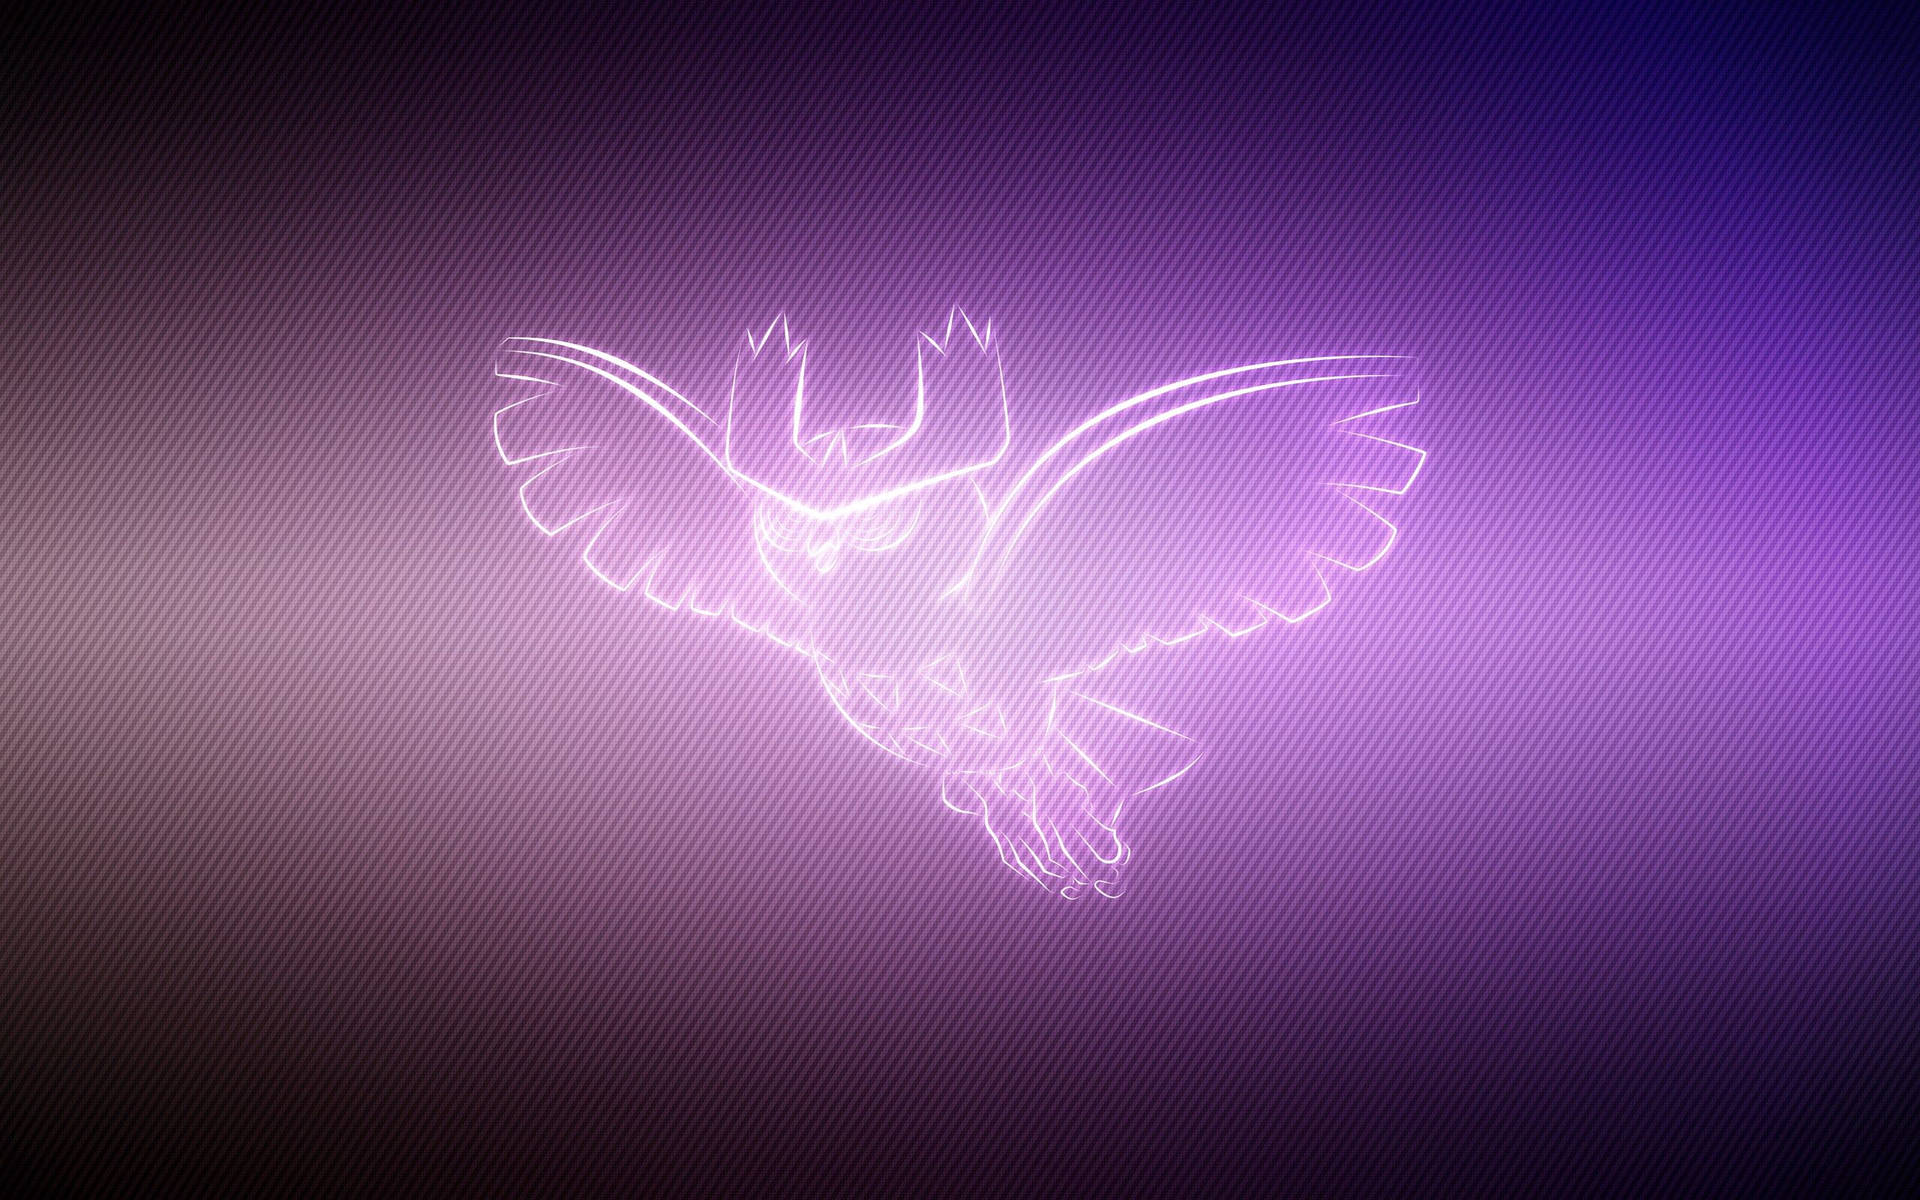 A Noctowl Flying majestically in the Evening Sky Wallpaper